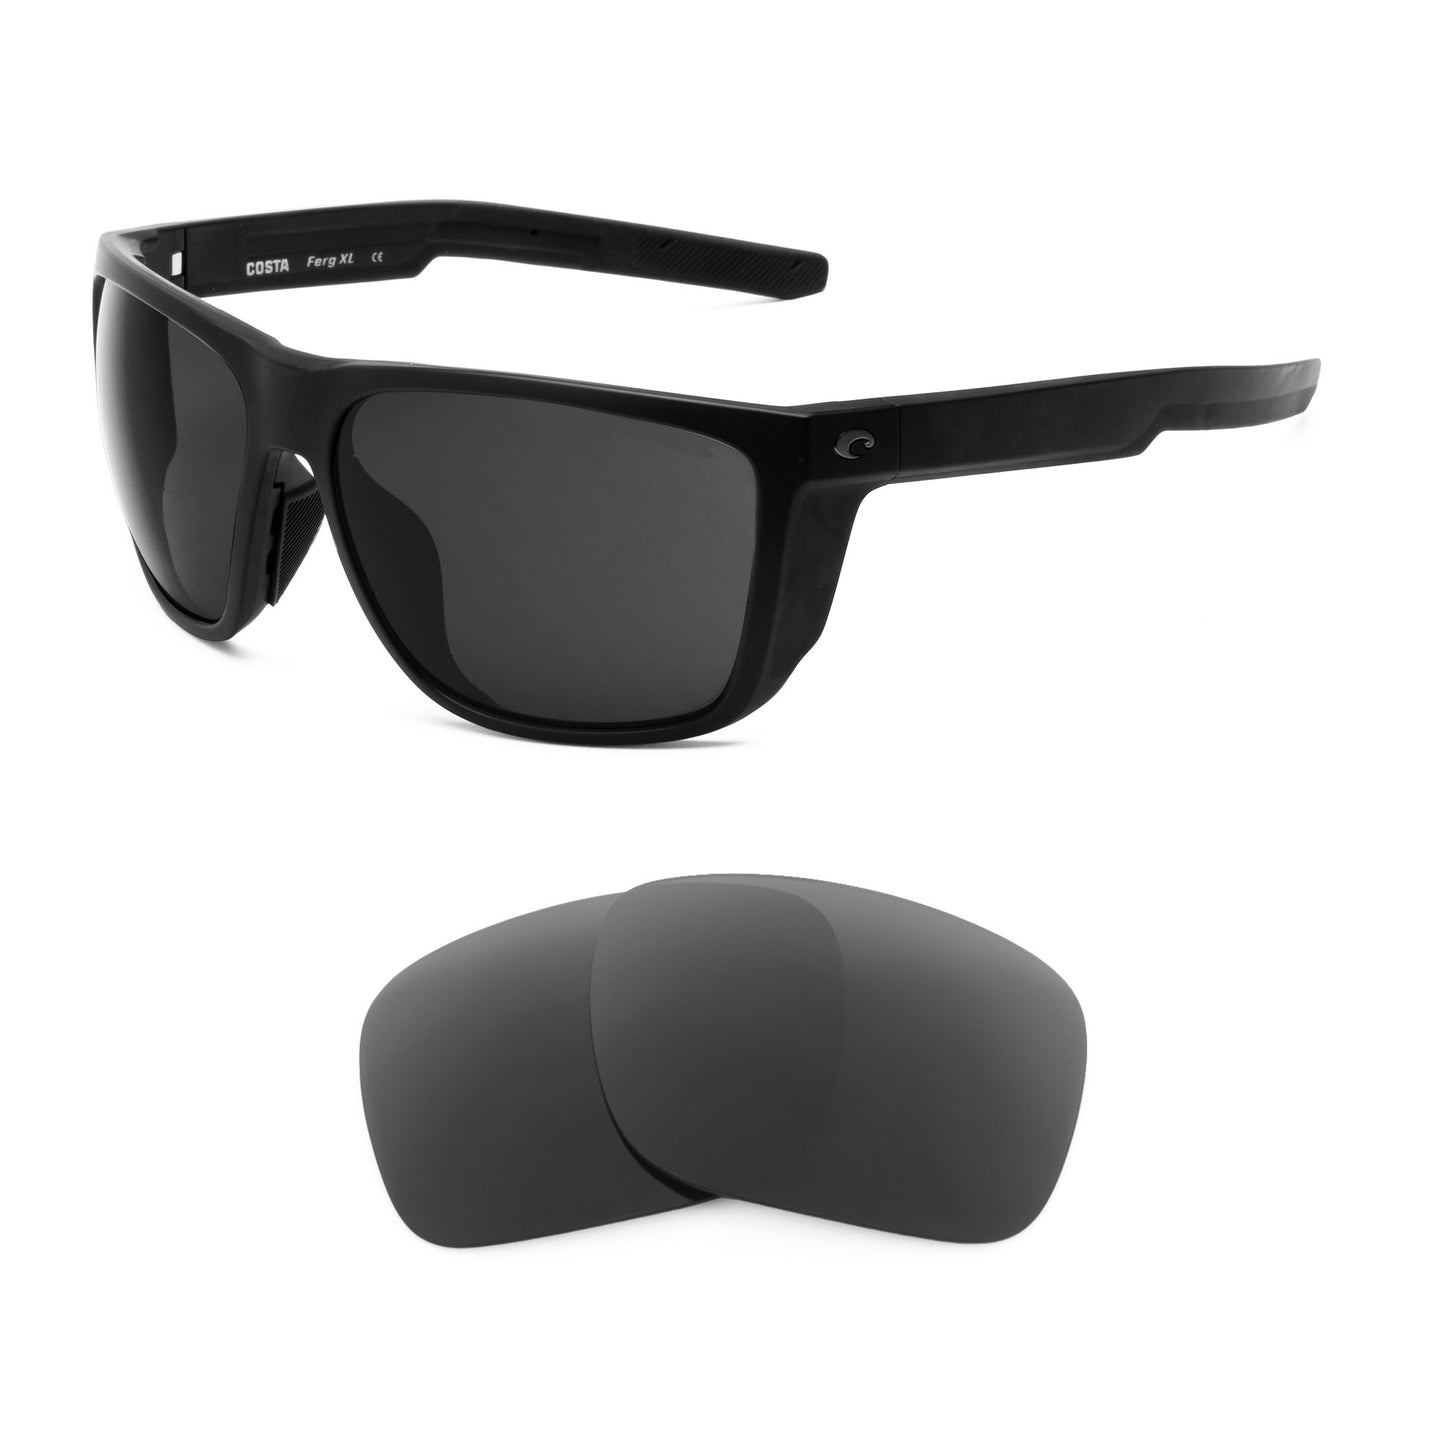 Costa Ferg XL sunglasses with replacement lenses